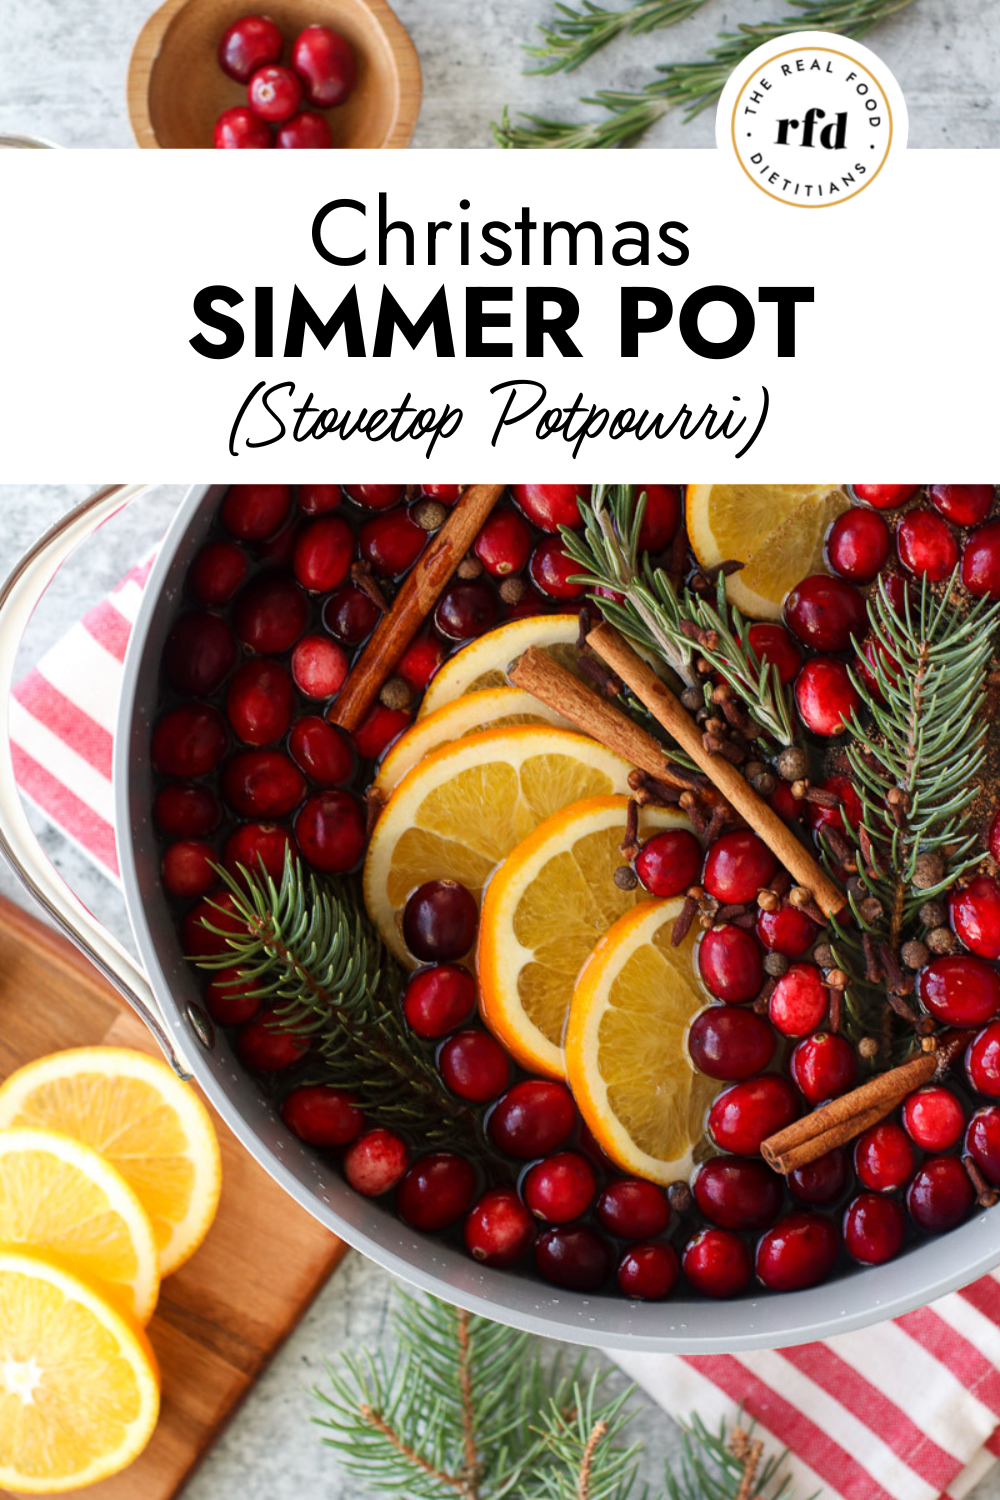 https://therealfooddietitians.com/wp-content/uploads/2022/11/Christmas-Simmer-Pot-1000-%C3%97-1500-px.png